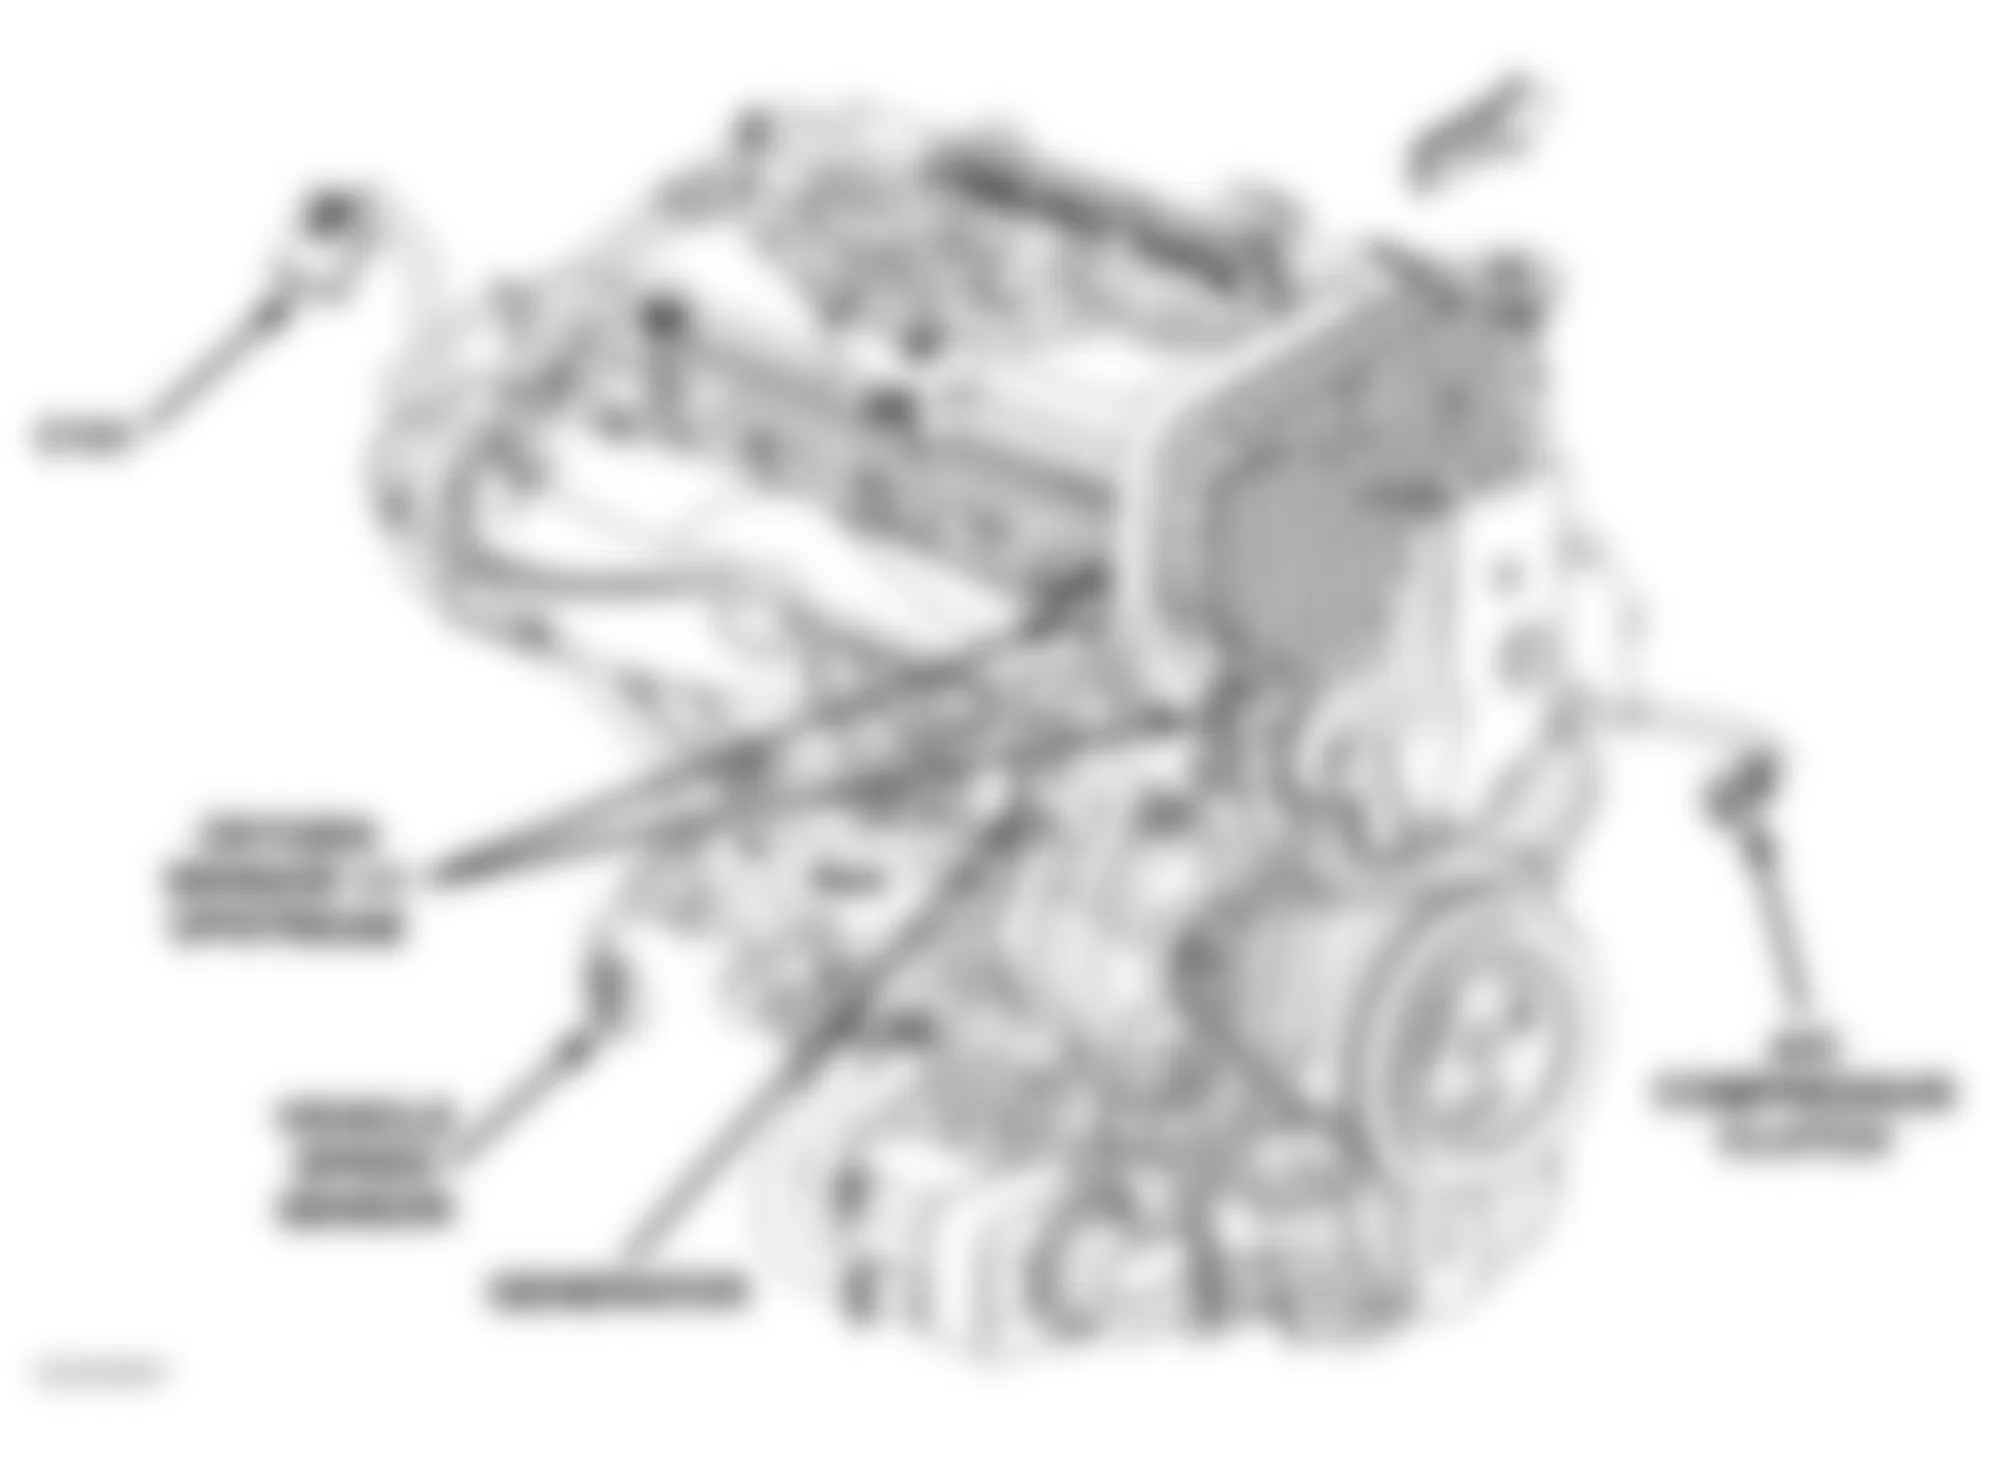 Dodge SX R/T 2004 - Component Locations -  Rear Of Engine (2.4L Turbo)